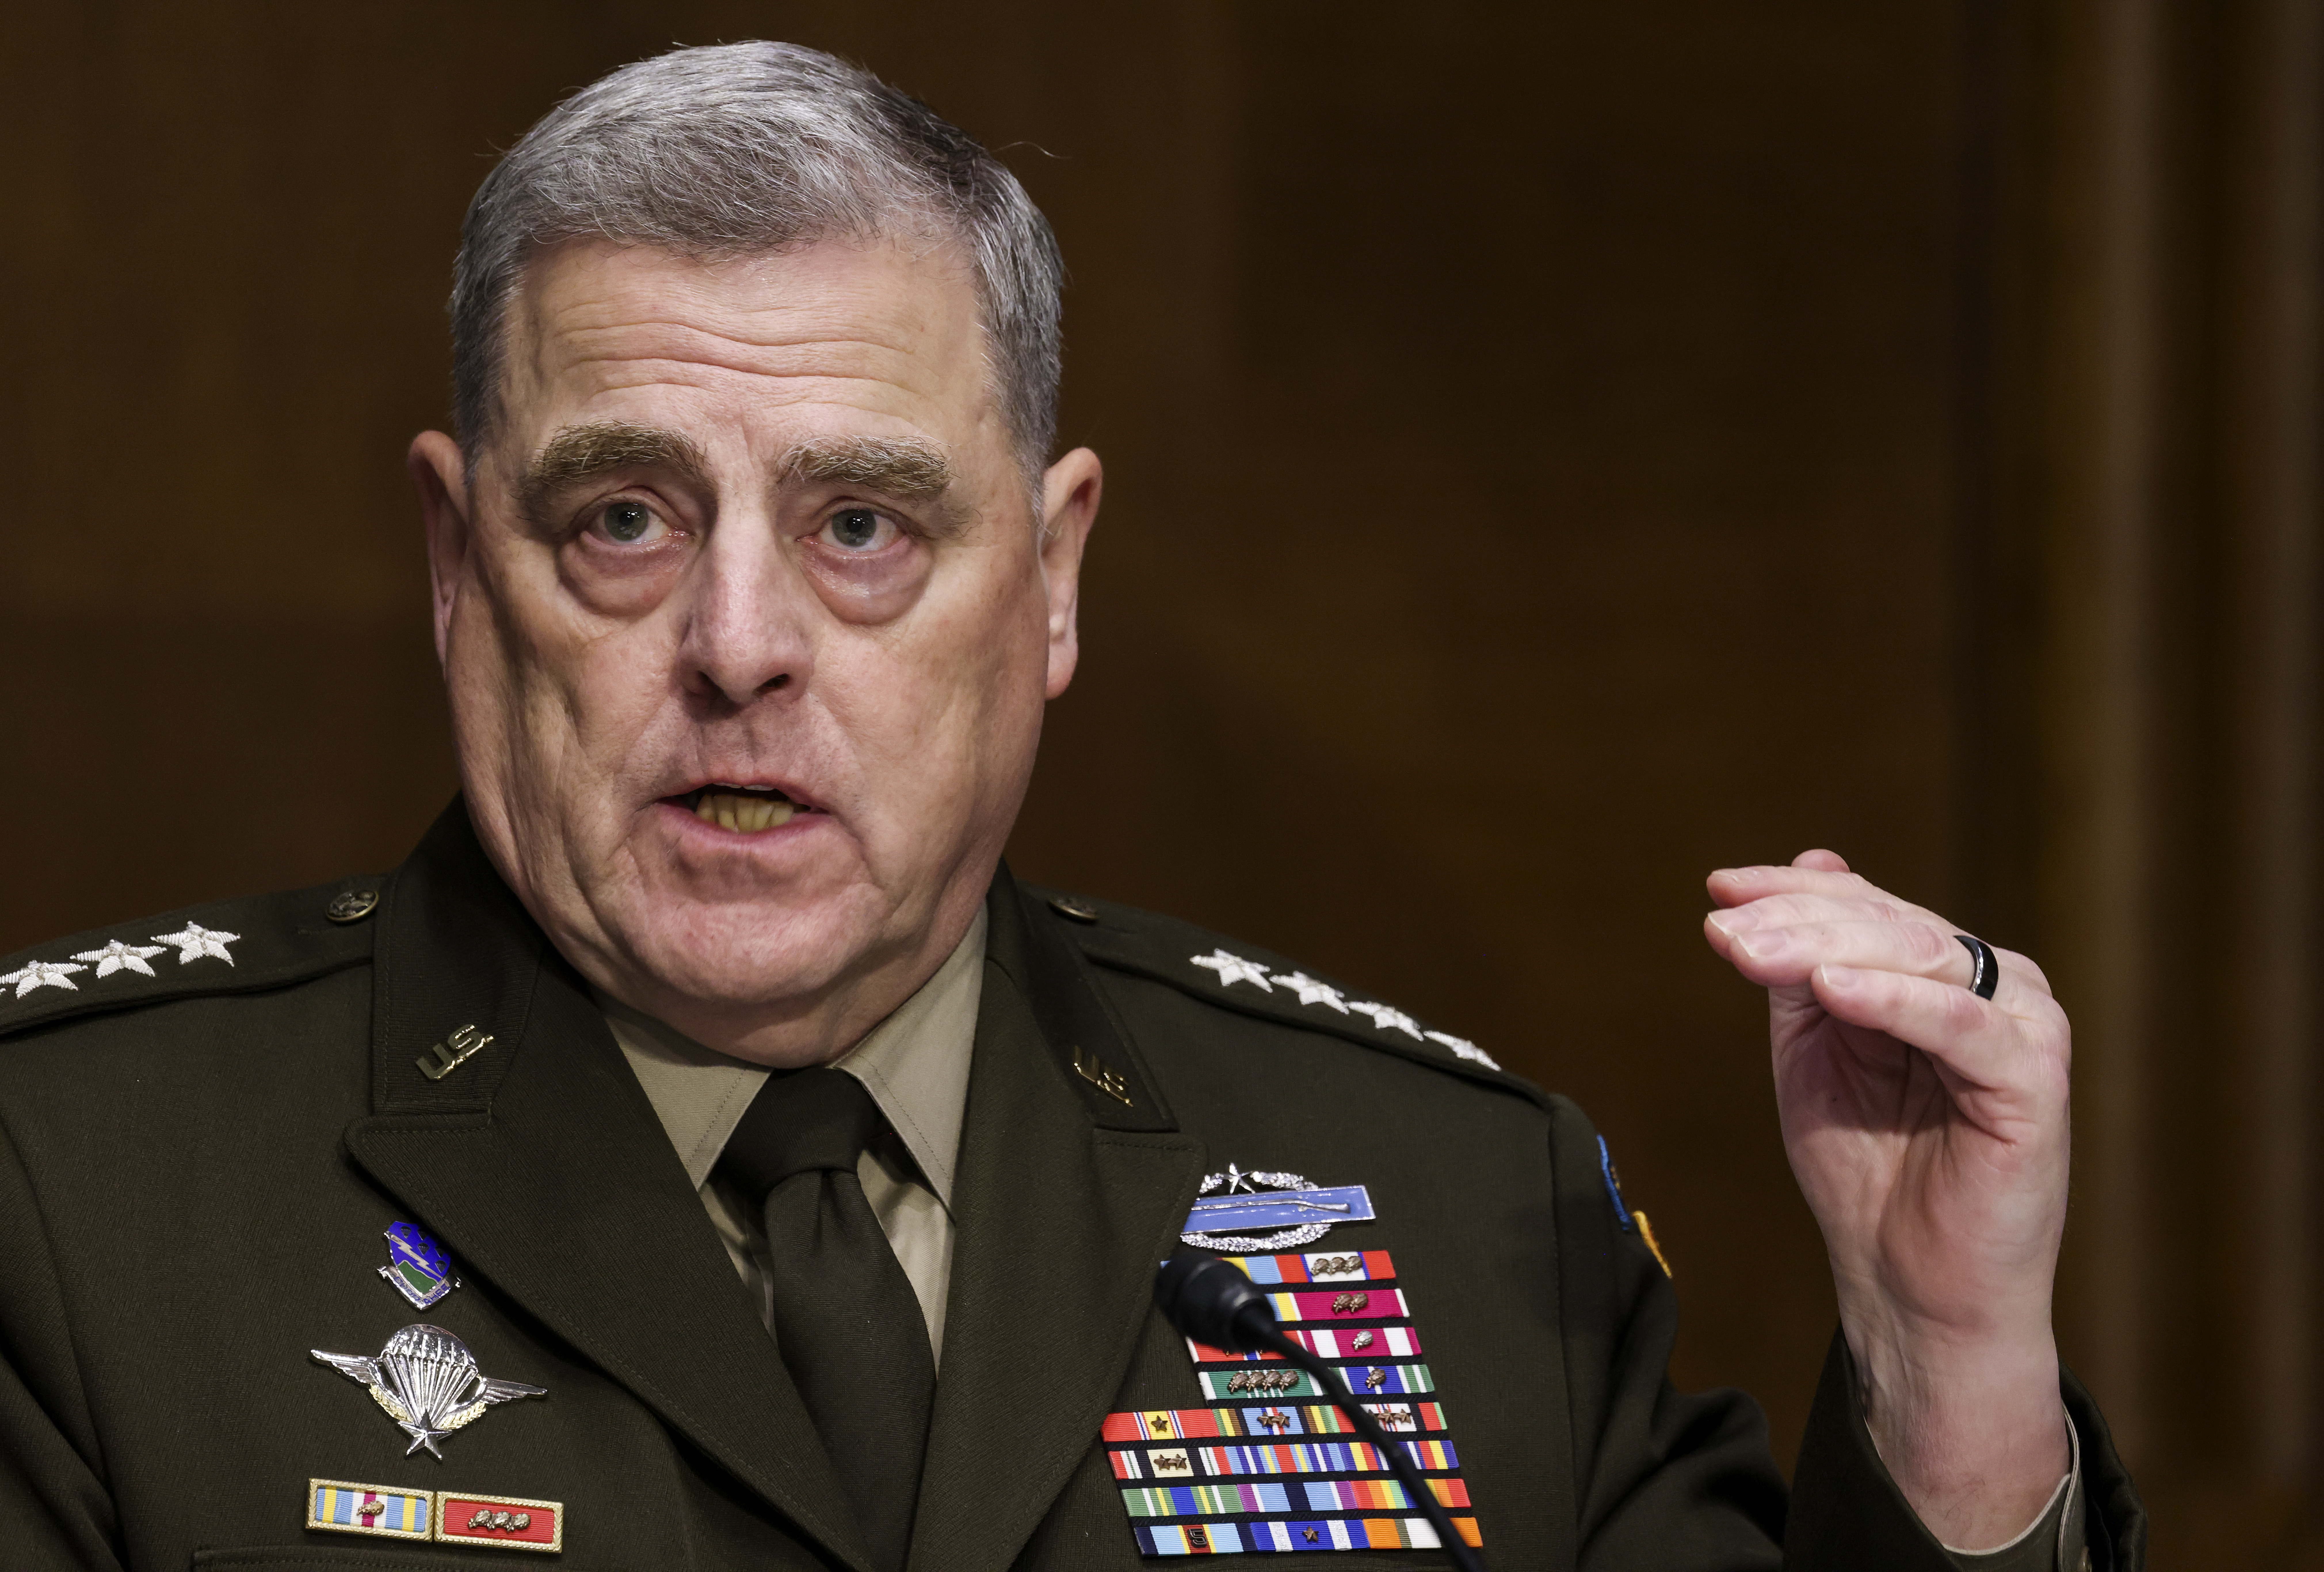 WASHINGTON, DC - JUNE 17: Joint Chiefs of Staff Chair Gen. Mark Milley testifies on the Defense Department's budget request during a Senate Appropriations Committee hearing on Capitol Hill on June 17, 2021 in Washington, DC. The hearings are to examine proposed budget estimates and justification for fiscal year 2022 for the Department of Defense. (Photo by Evelyn Hockstein-Pool/Getty Images)